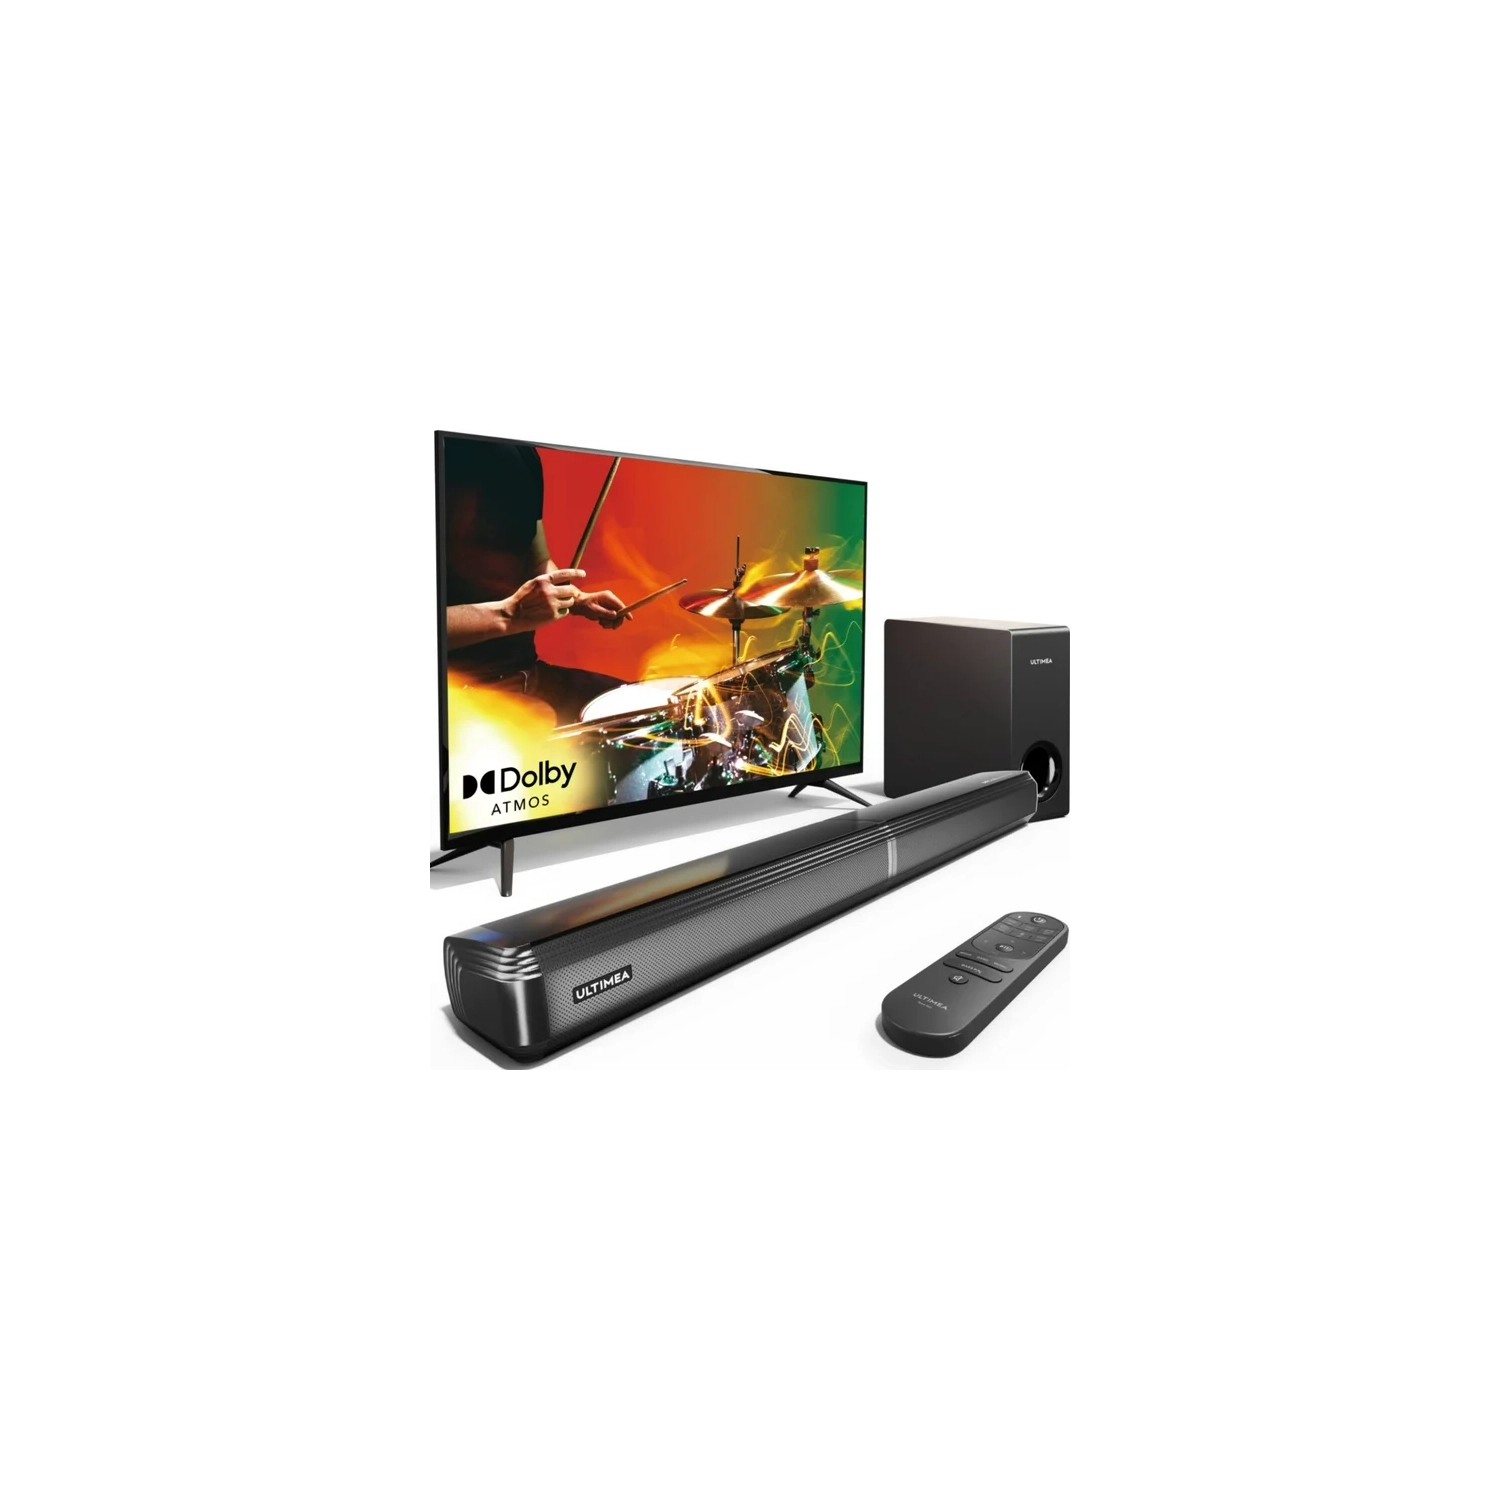 ULTIMEA 4.1ch Dolby Atmos Sound Bar for Smart TV, 2-in-1 Bluetooth 5.3 Soundbar for TV with Subwoofer, 280W Peak Power, 3 EQ Modes TV Sound Bar, Bass Boost, HDMI in/eARC